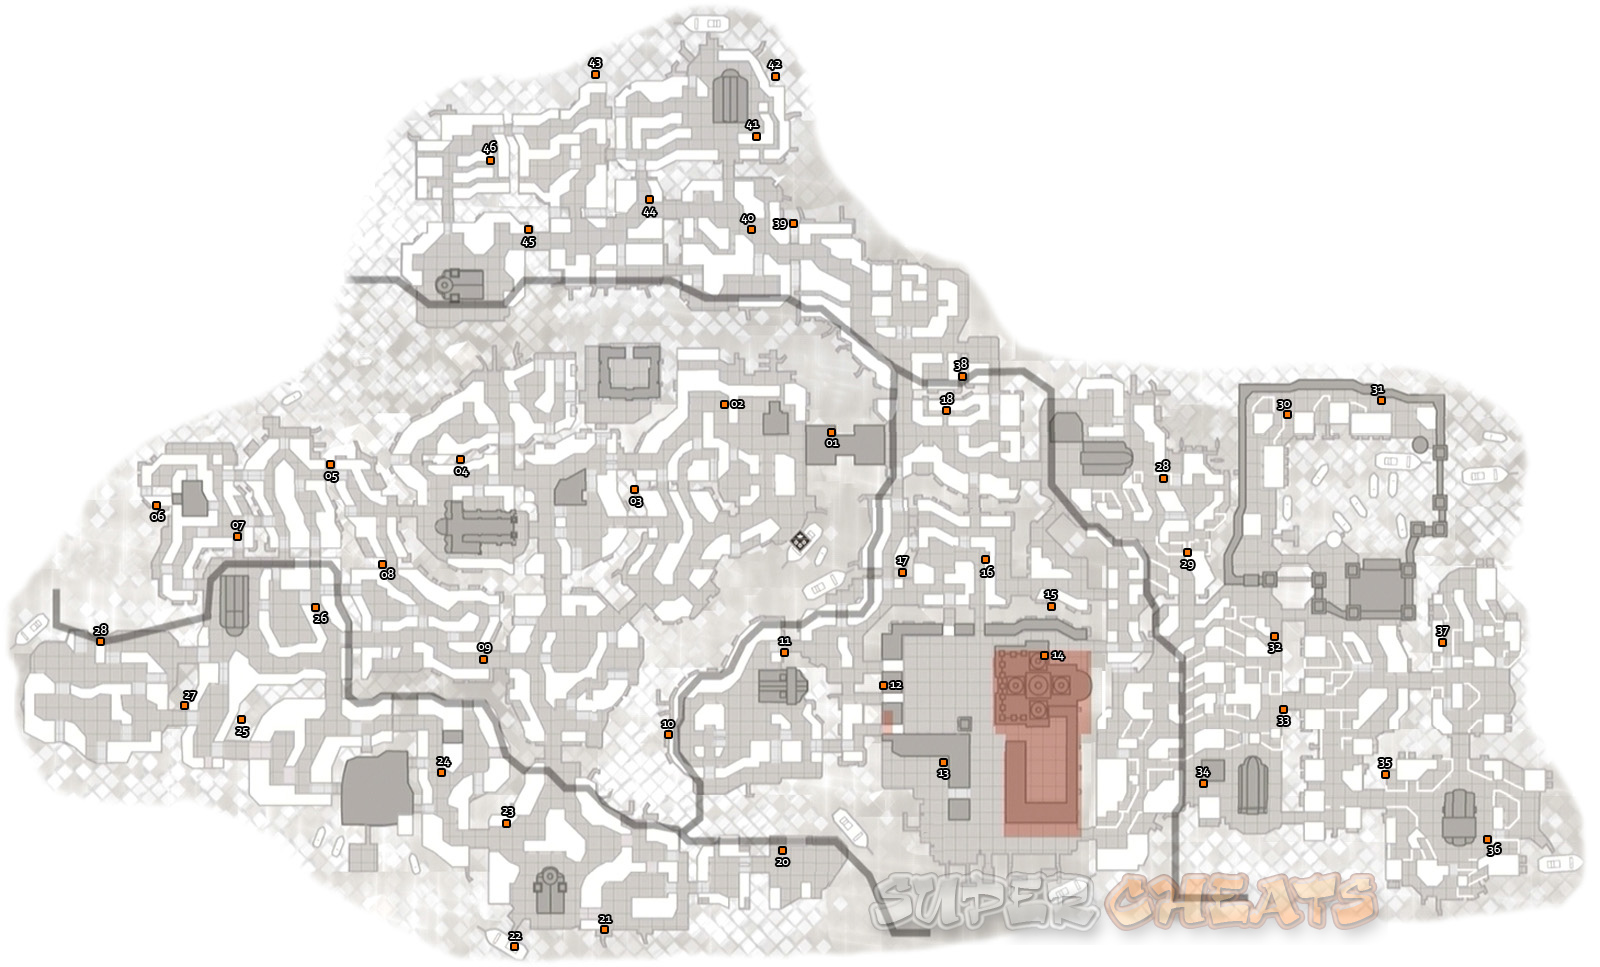 feather map assassins creed 2